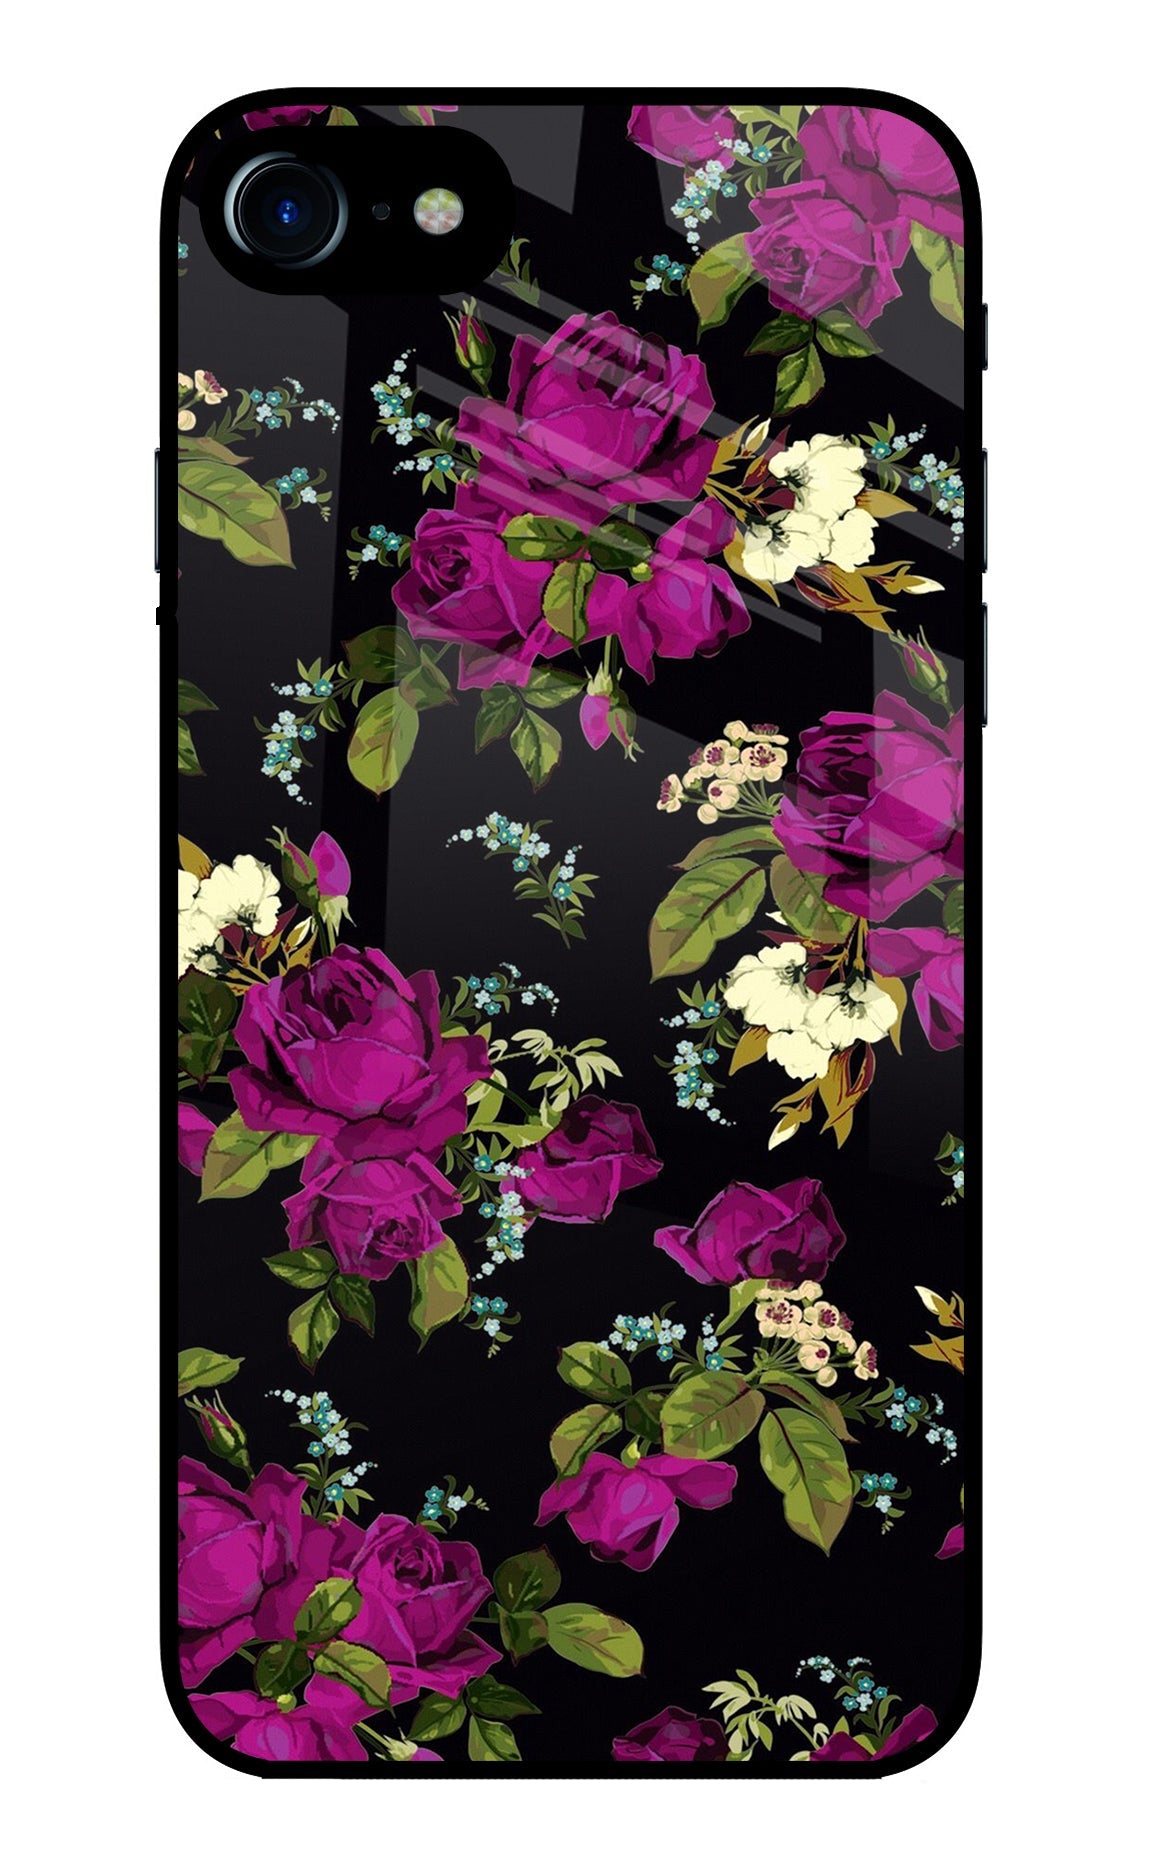 Flowers iPhone 7/7s Glass Case